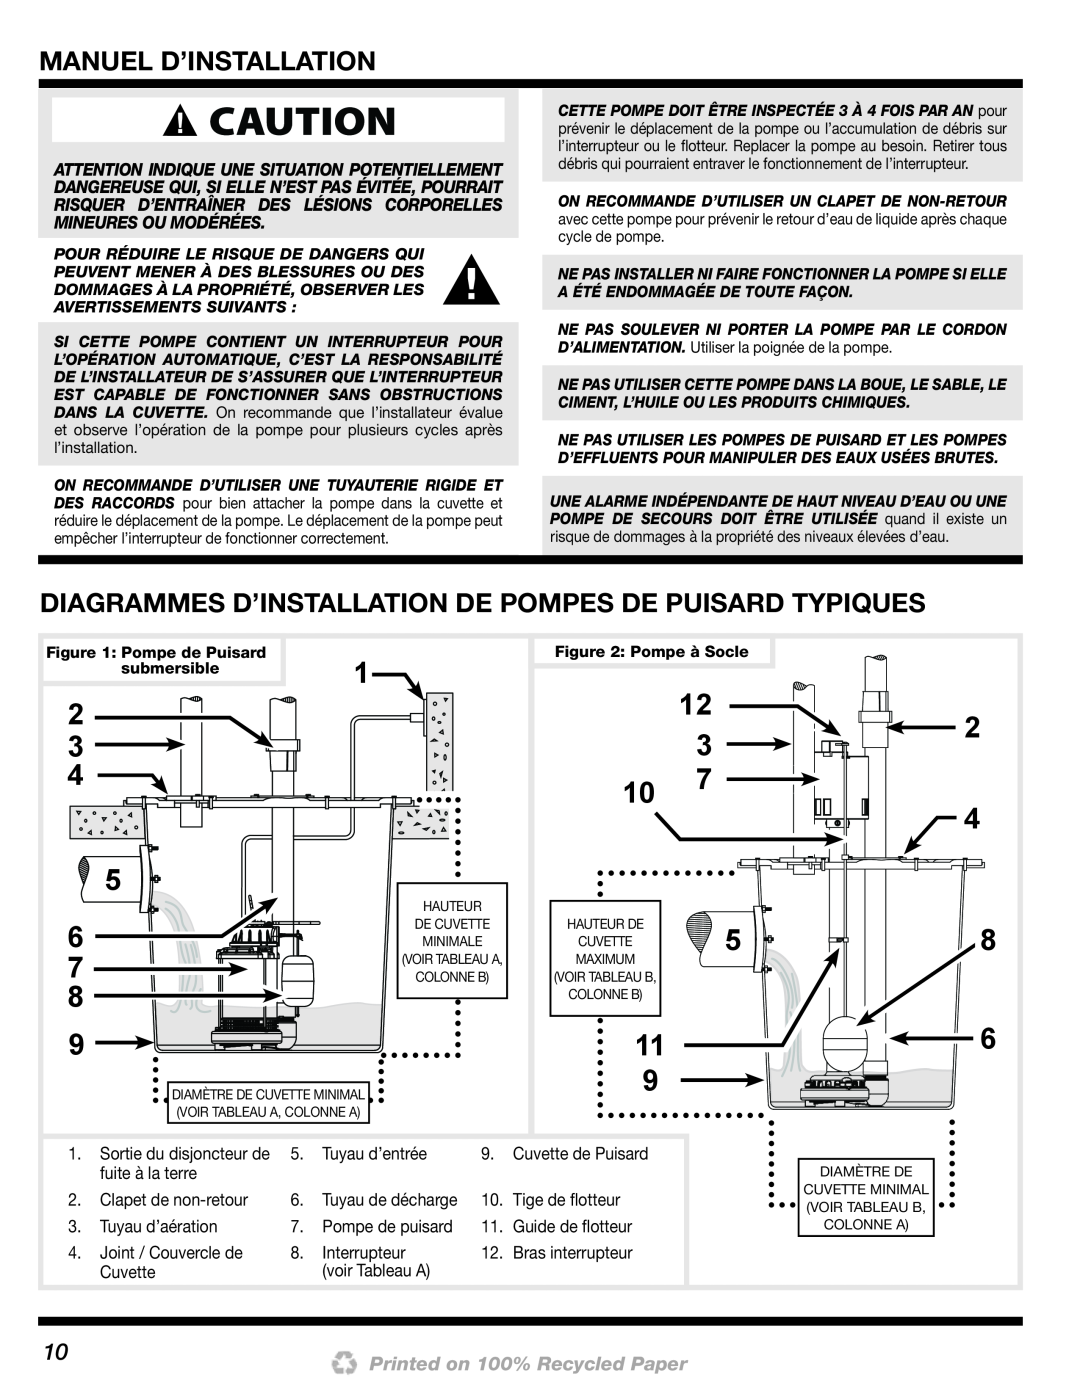 Wayne 200000-015 installation manual Manuel D’Installation, 2 3 4 5, Printed on 100% Recycled Paper 